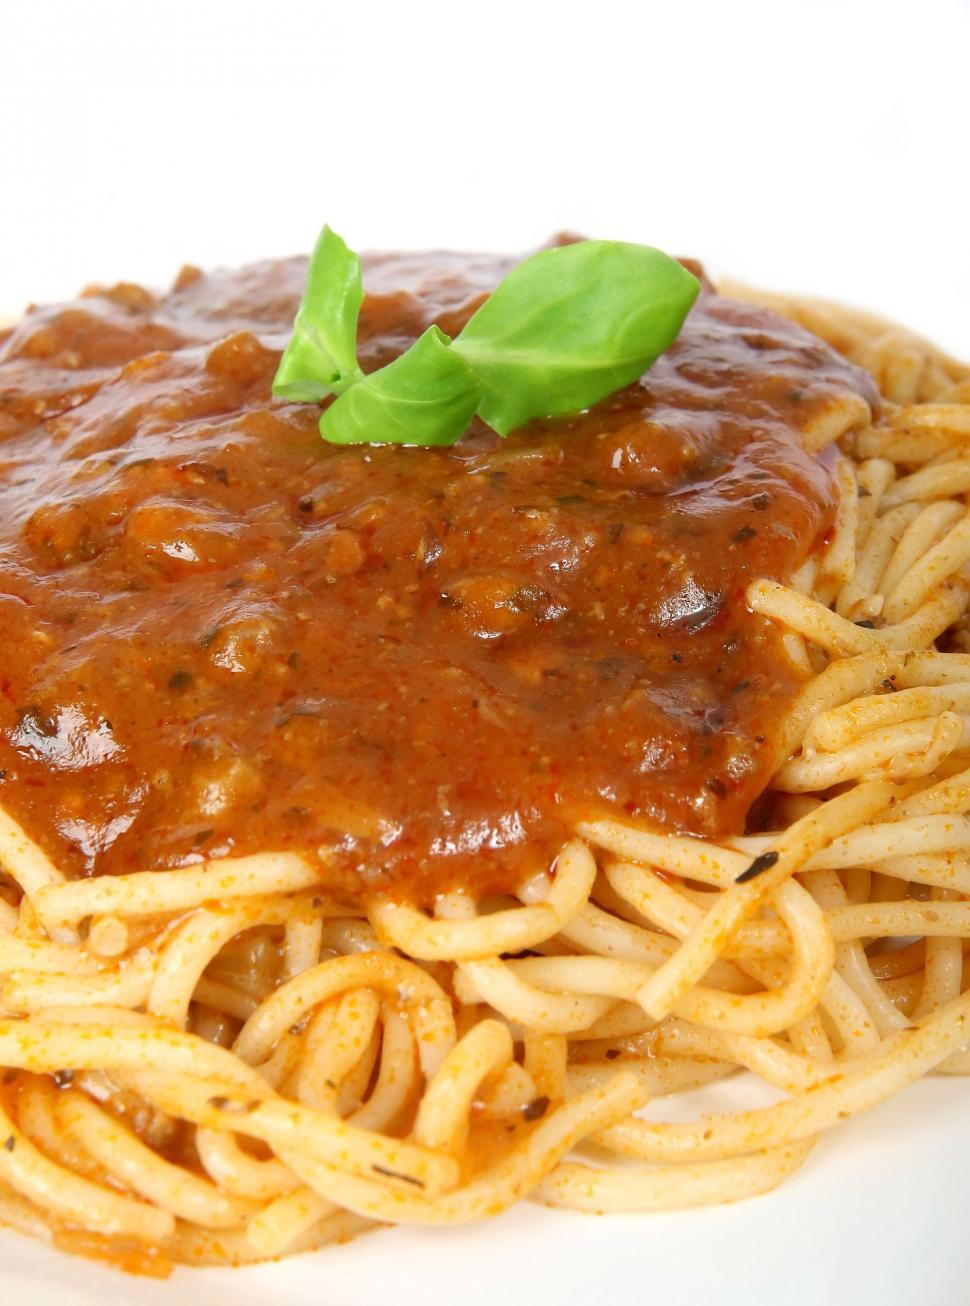 Free Image of Plate of Spaghetti With Sauce and Basil 